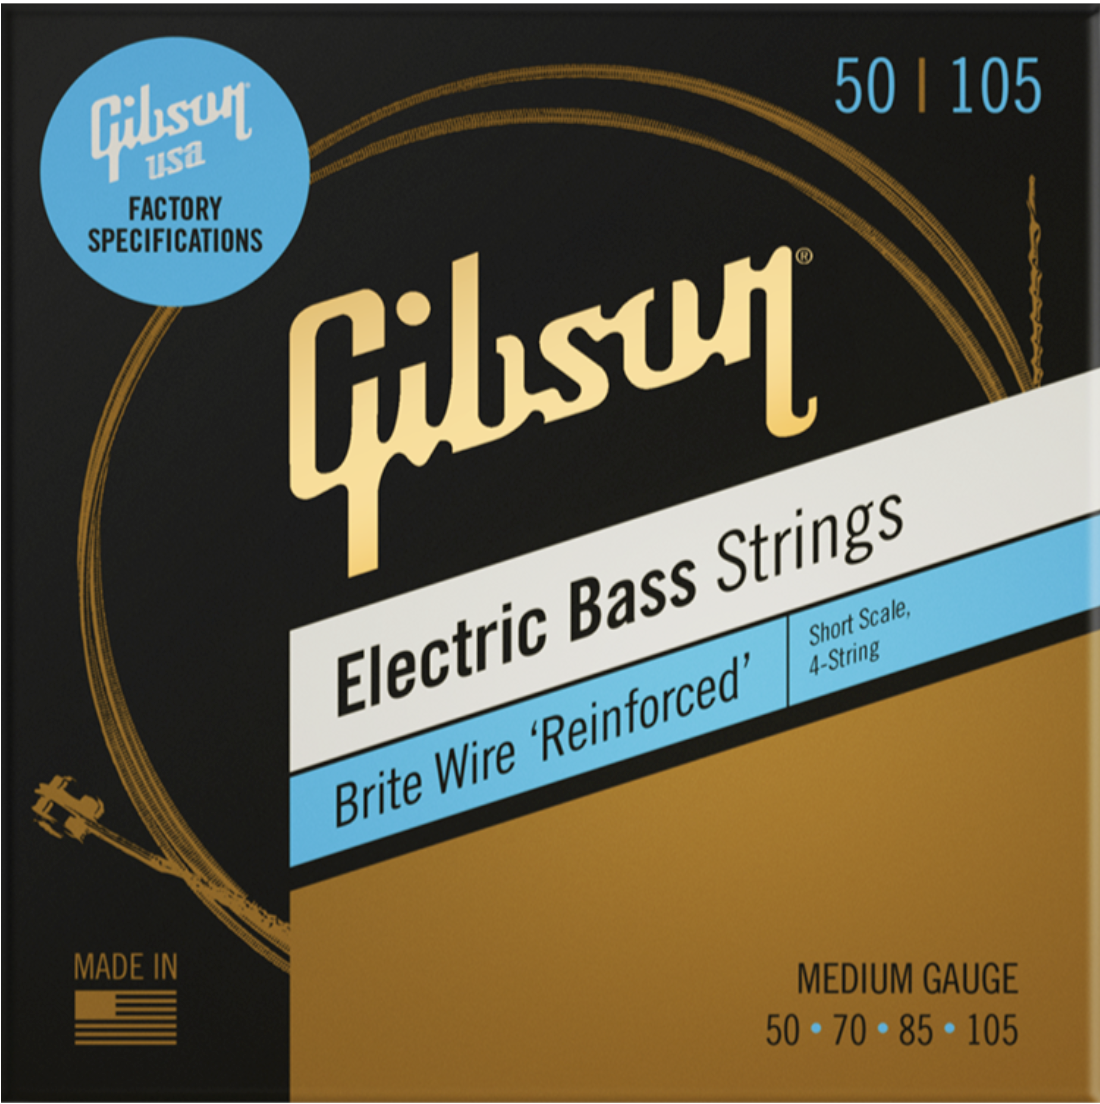 50-105 Short Scale Brite Wire Electric Bass Strings, 4-String, Roundwound Medium